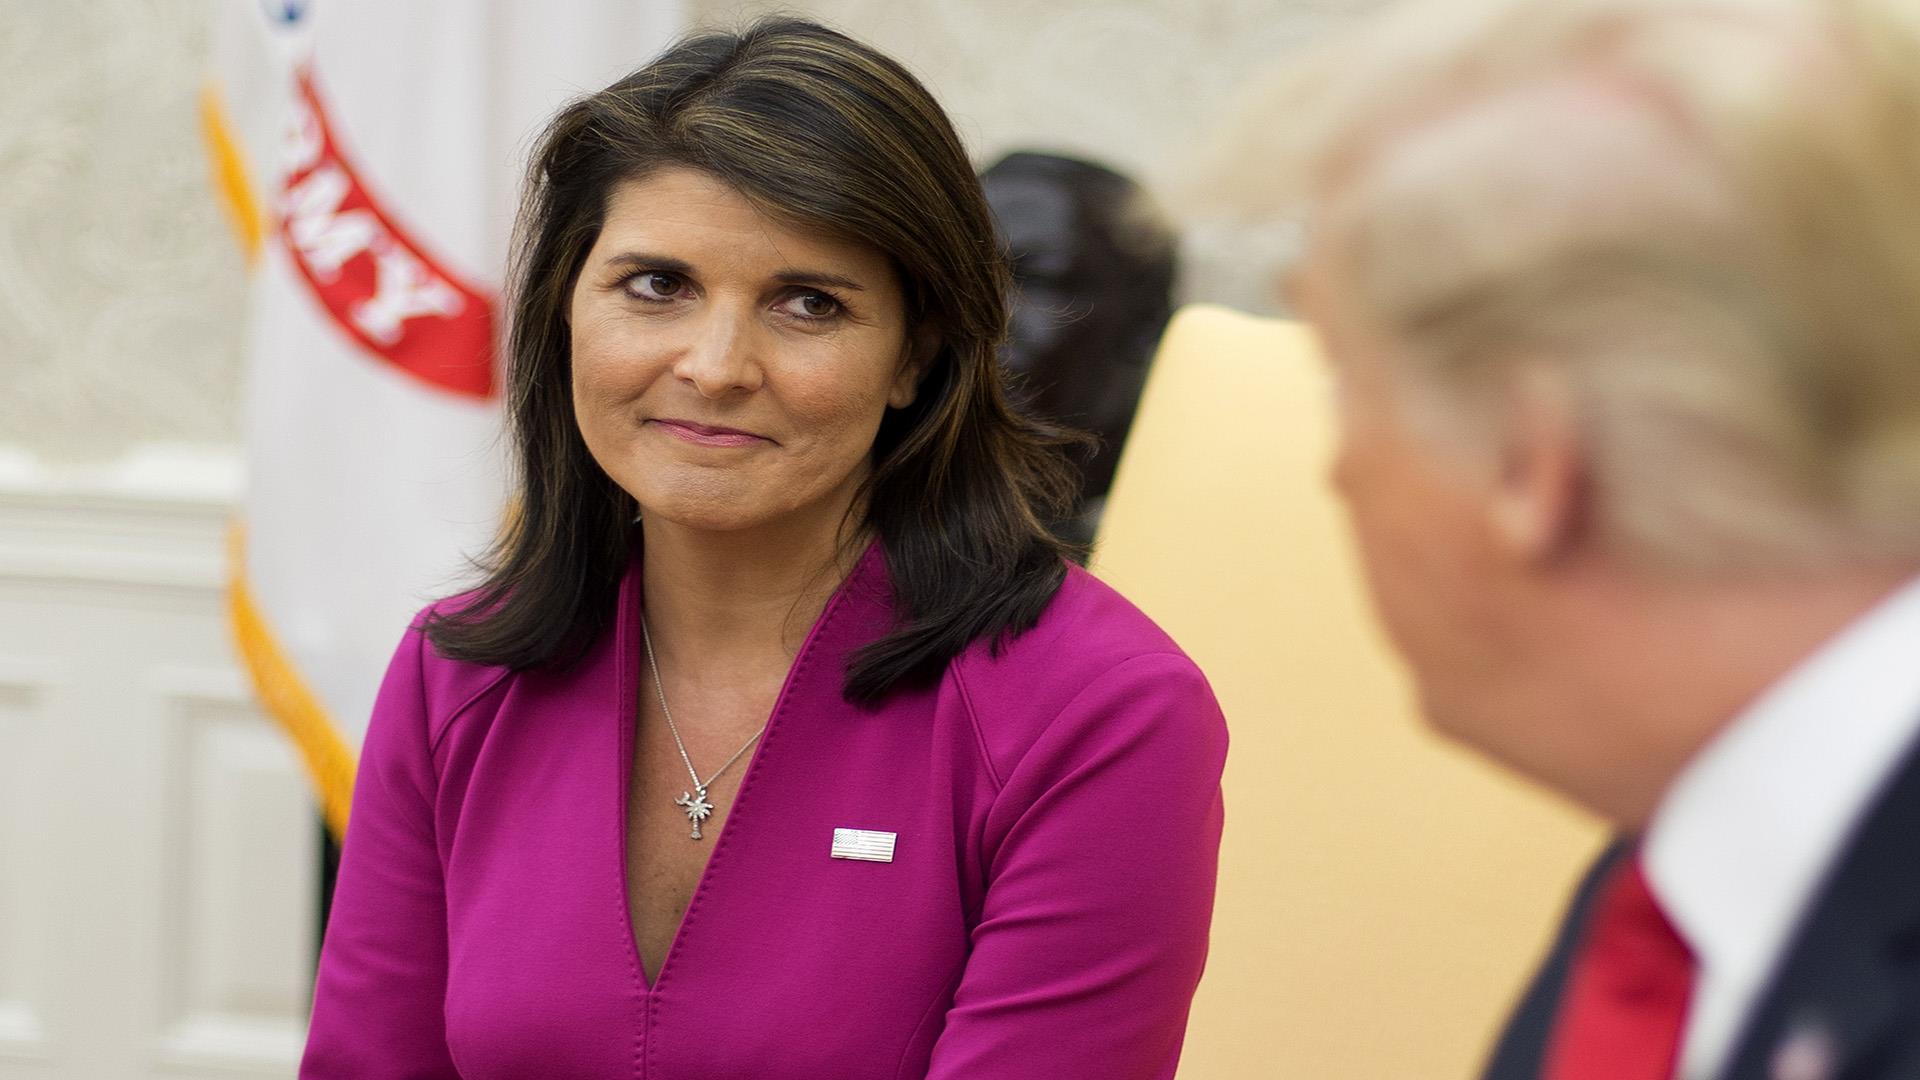 Nikki Haley Resigns as U.S. Ambassador to the United Nations